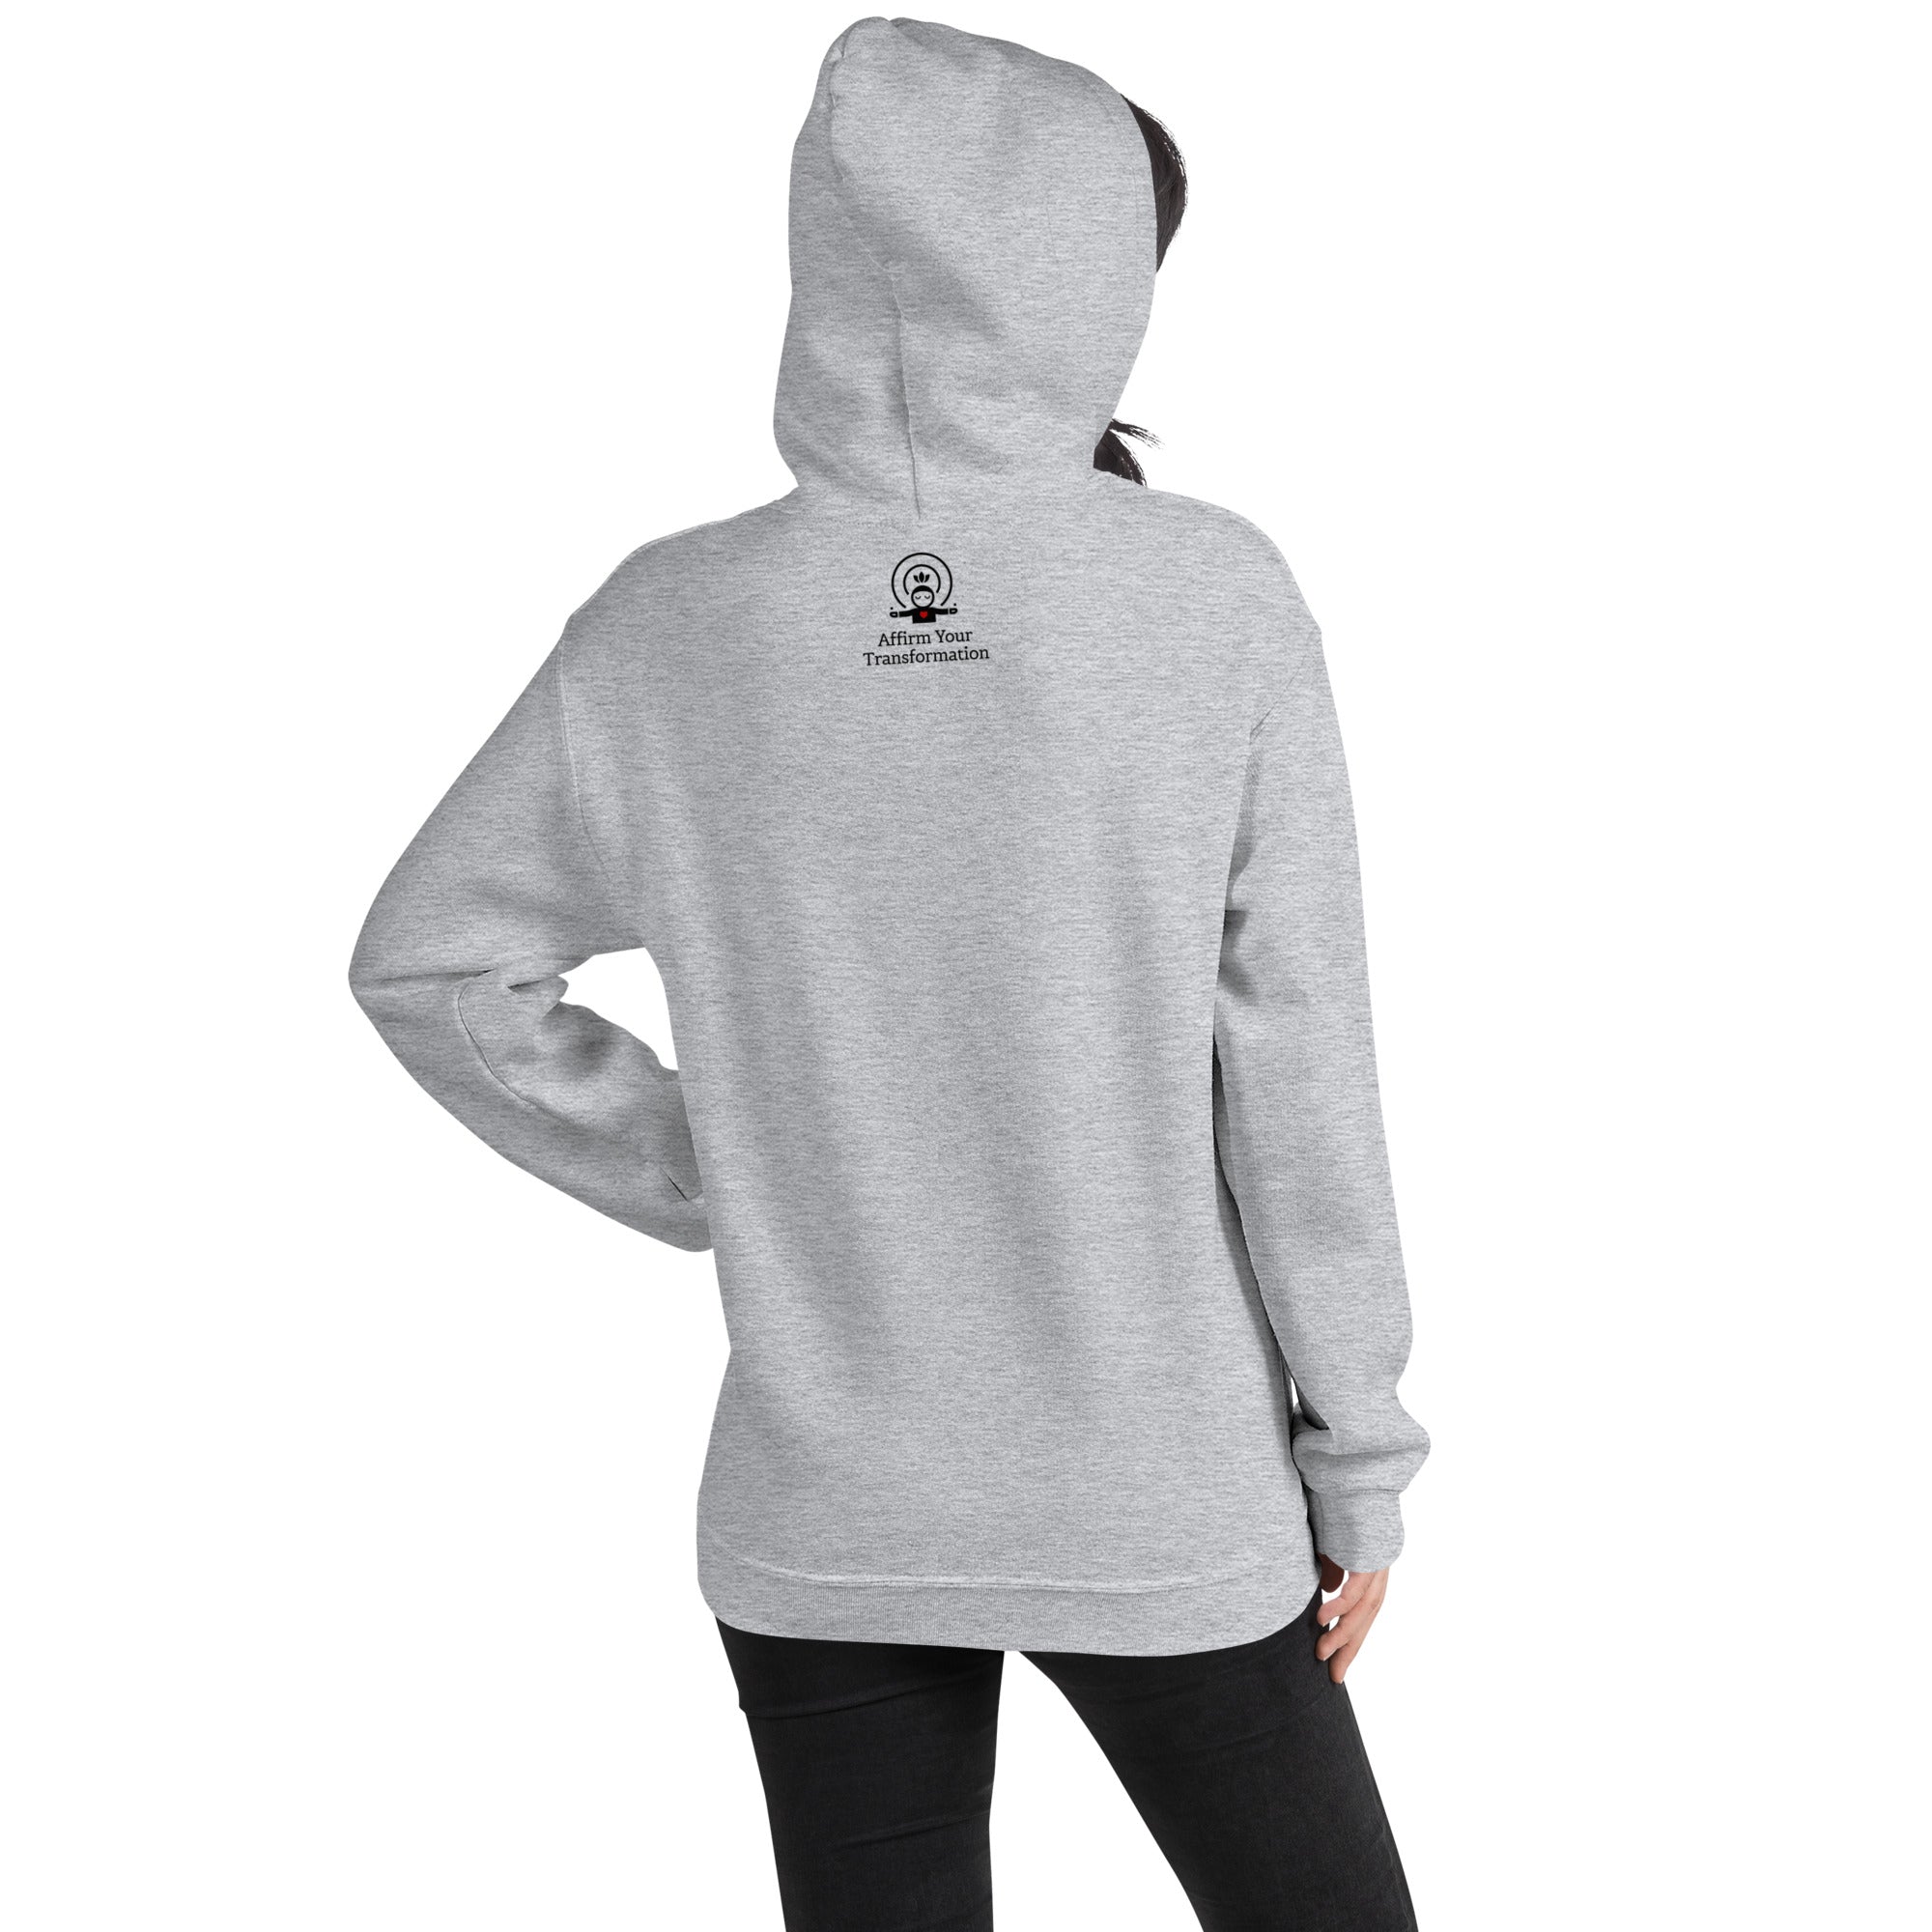 I AM AMAZING Mirror Affirmation Hoodie (Black Text) - 10 COLORS!